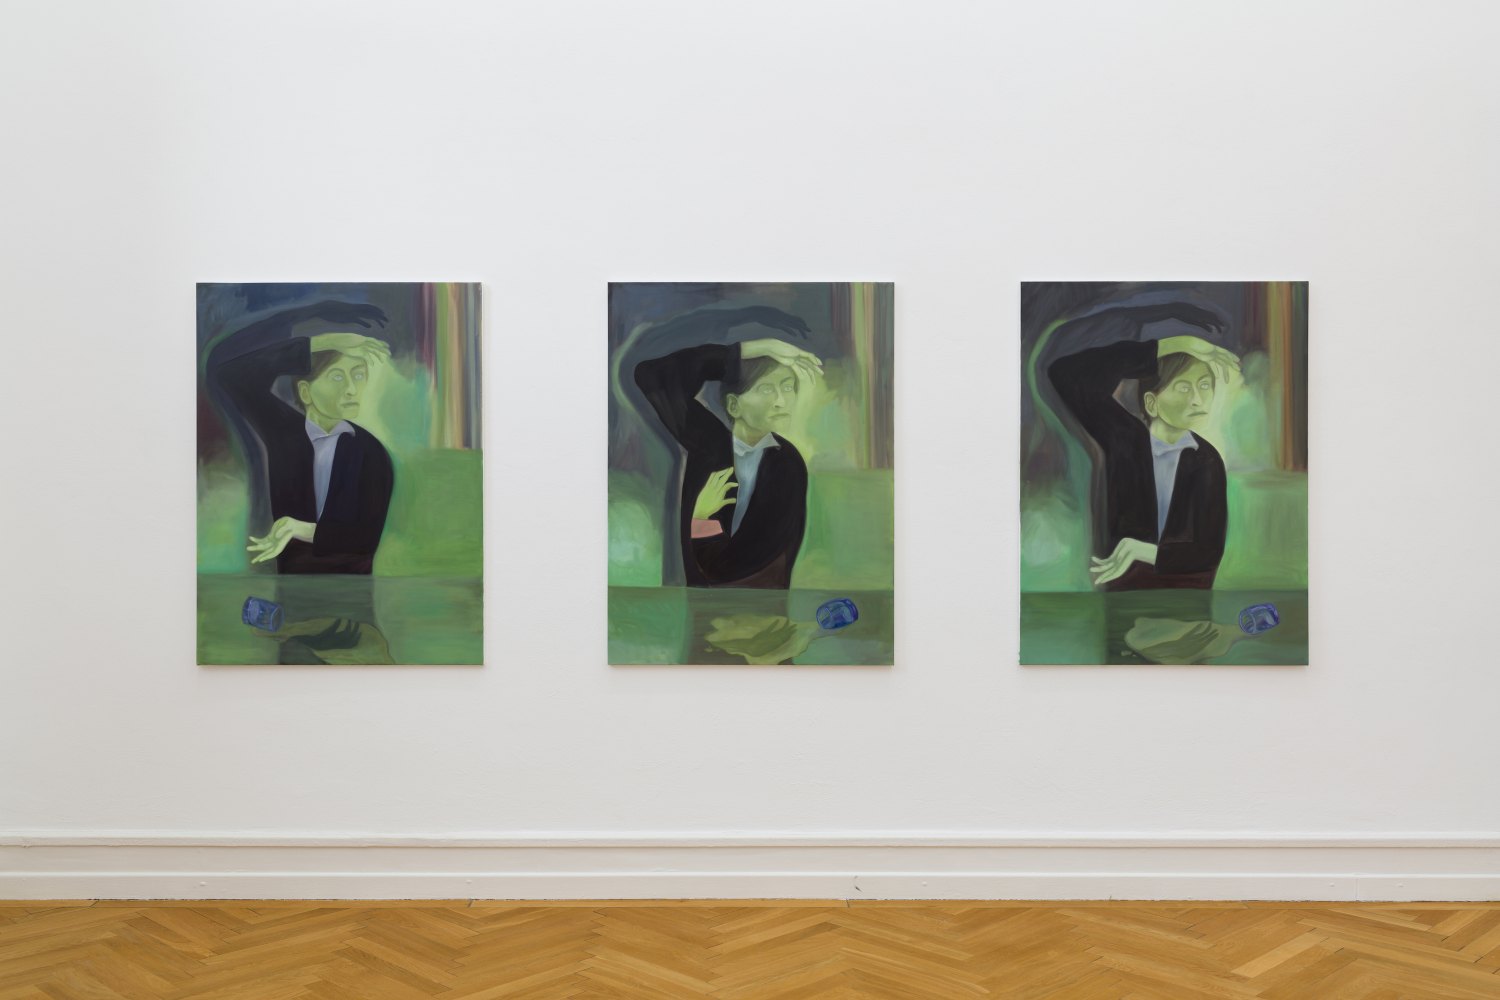  Jill Mulleady  The Green Room I & II, 2017  Oil on canvas, 122 x 91 cm each Angst vor Angst Installation view, Kunsthalle Bern